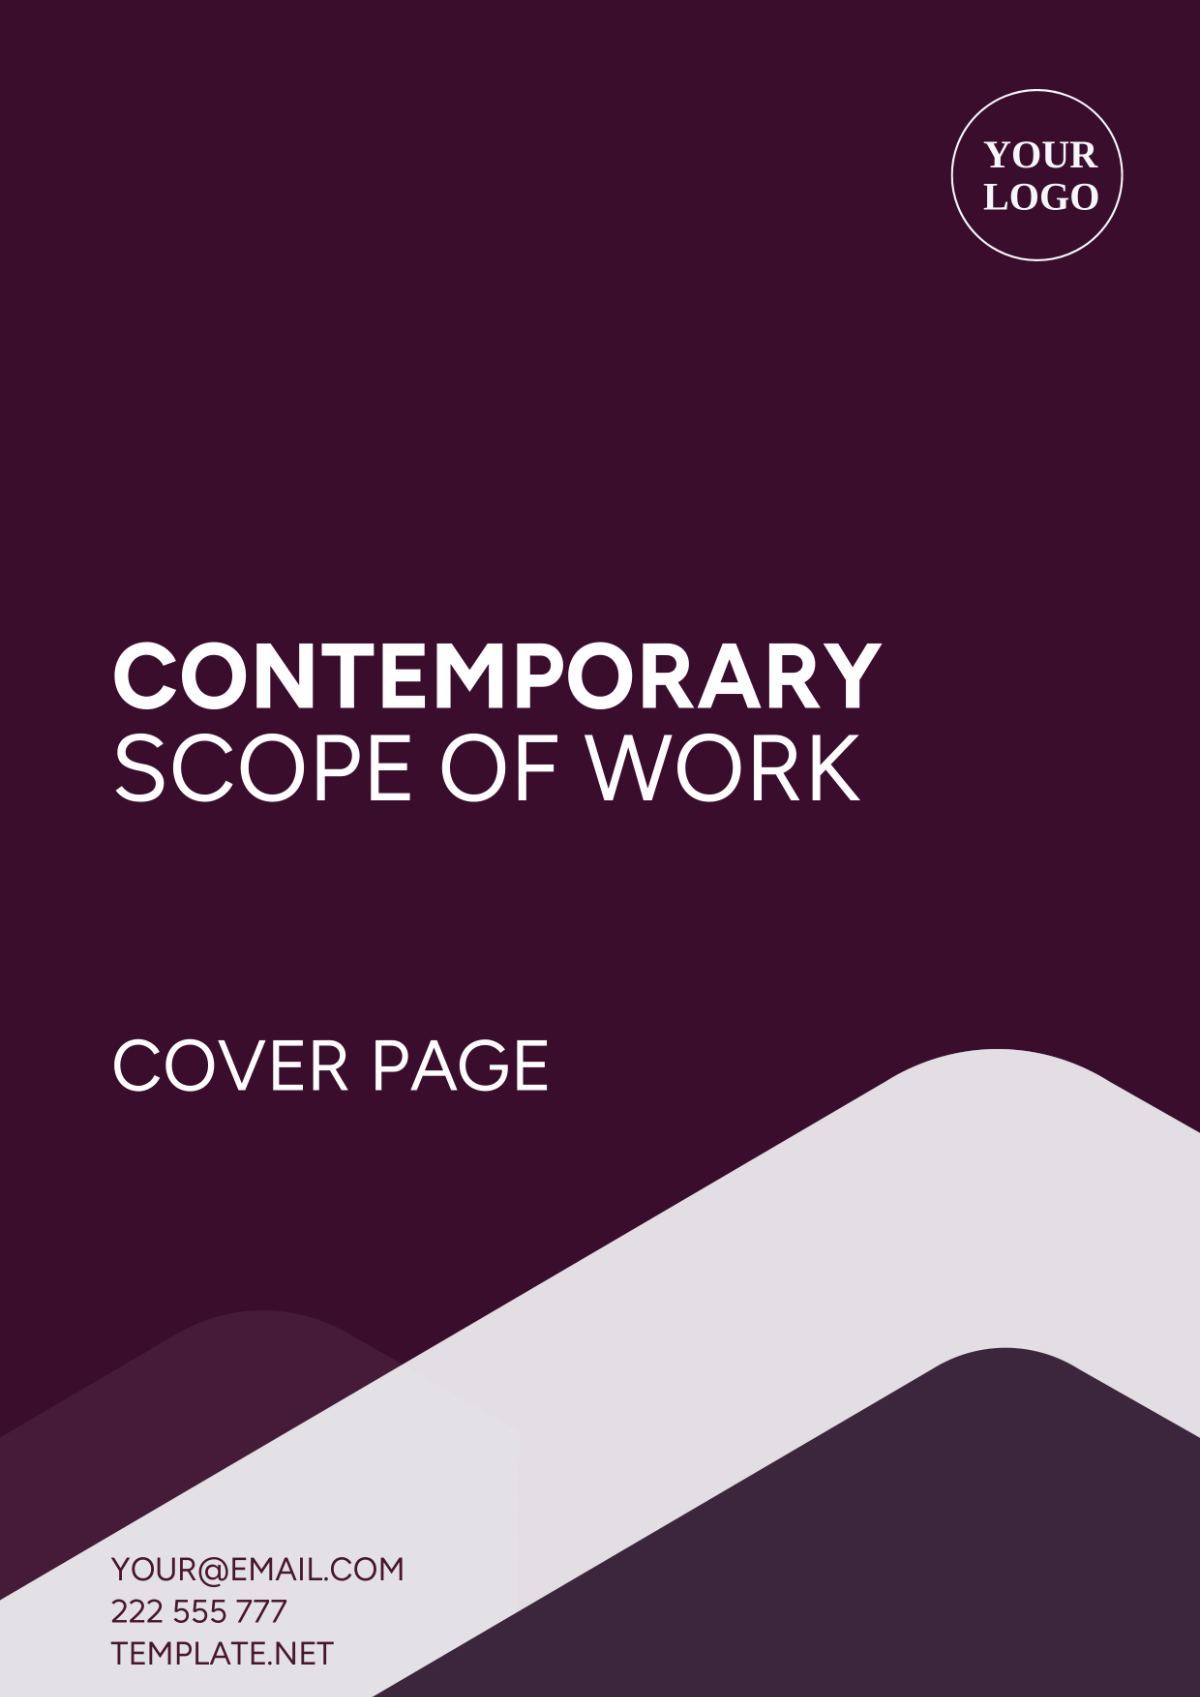 Contemporary Scope of Work Cover Page Template